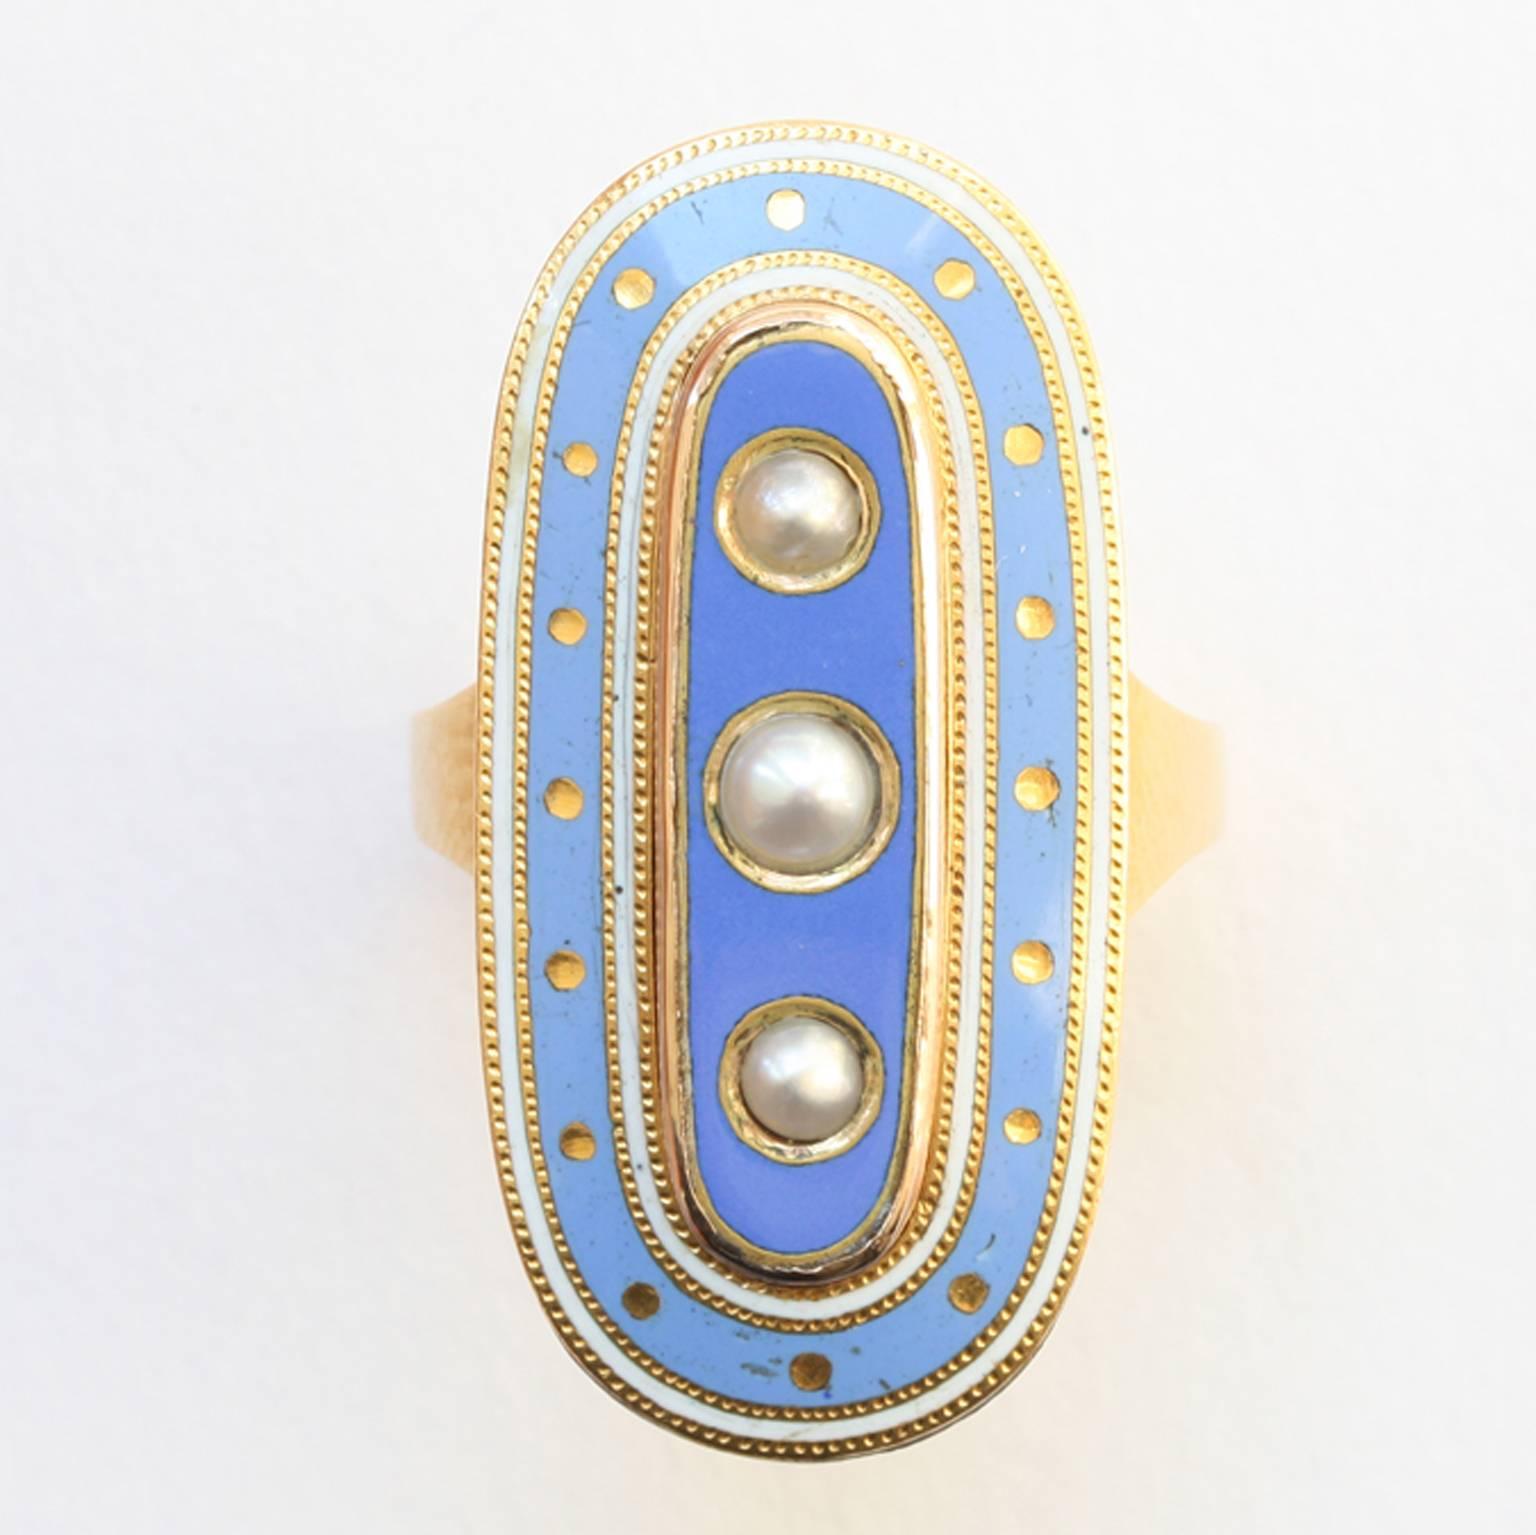 An 18 carat gold oval mourning ring with baby blue and white enamel (the white symbolizing the loss of a child and the blue is because Anne was considered to be royalty in the hearts of her family) decorated with three natural pearls in the center